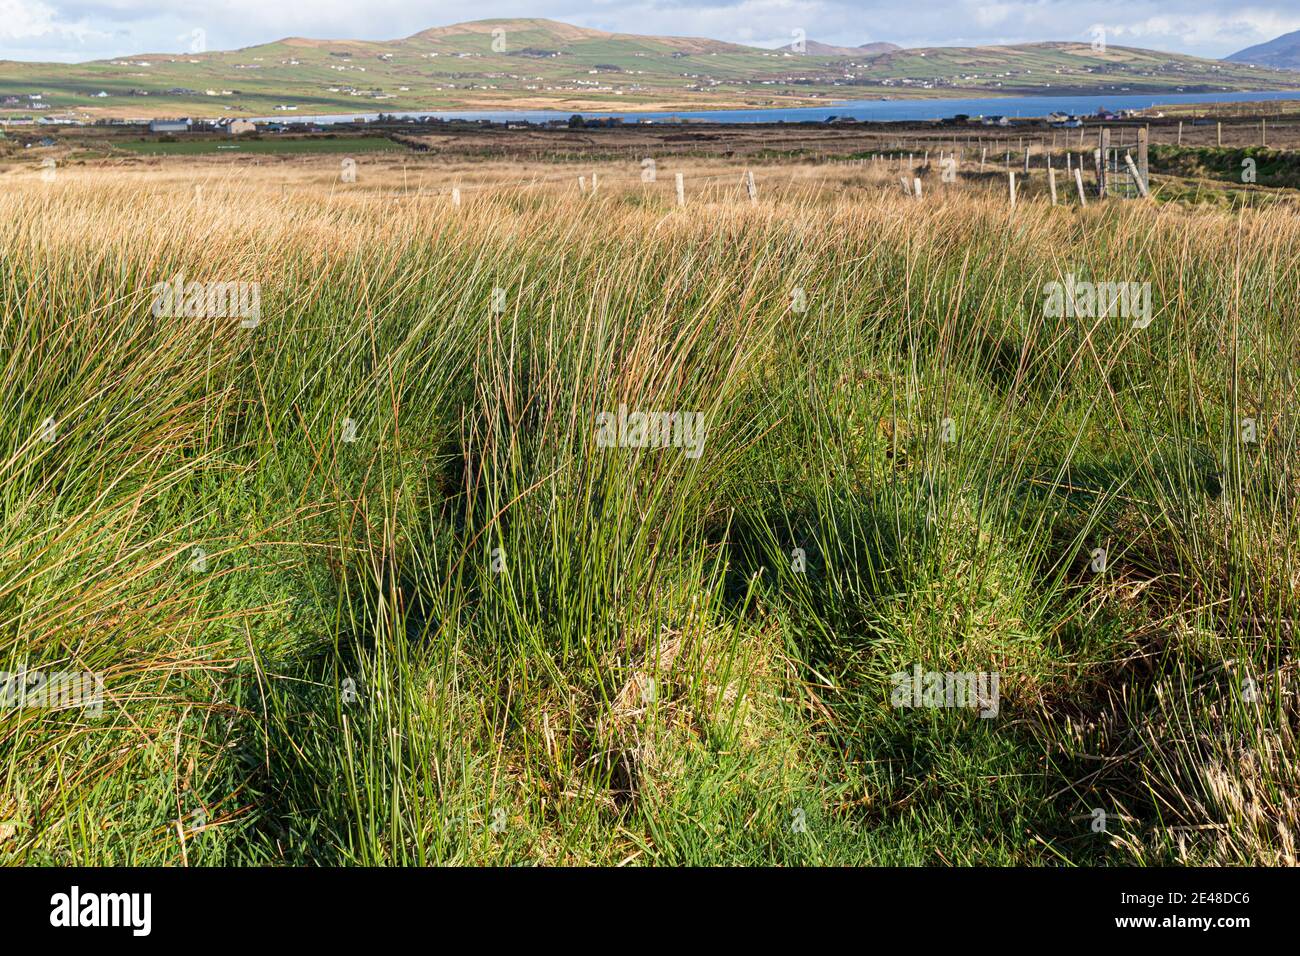 Rushes in farm field, Portmagee, County Kerry, Ireland Stock Photo